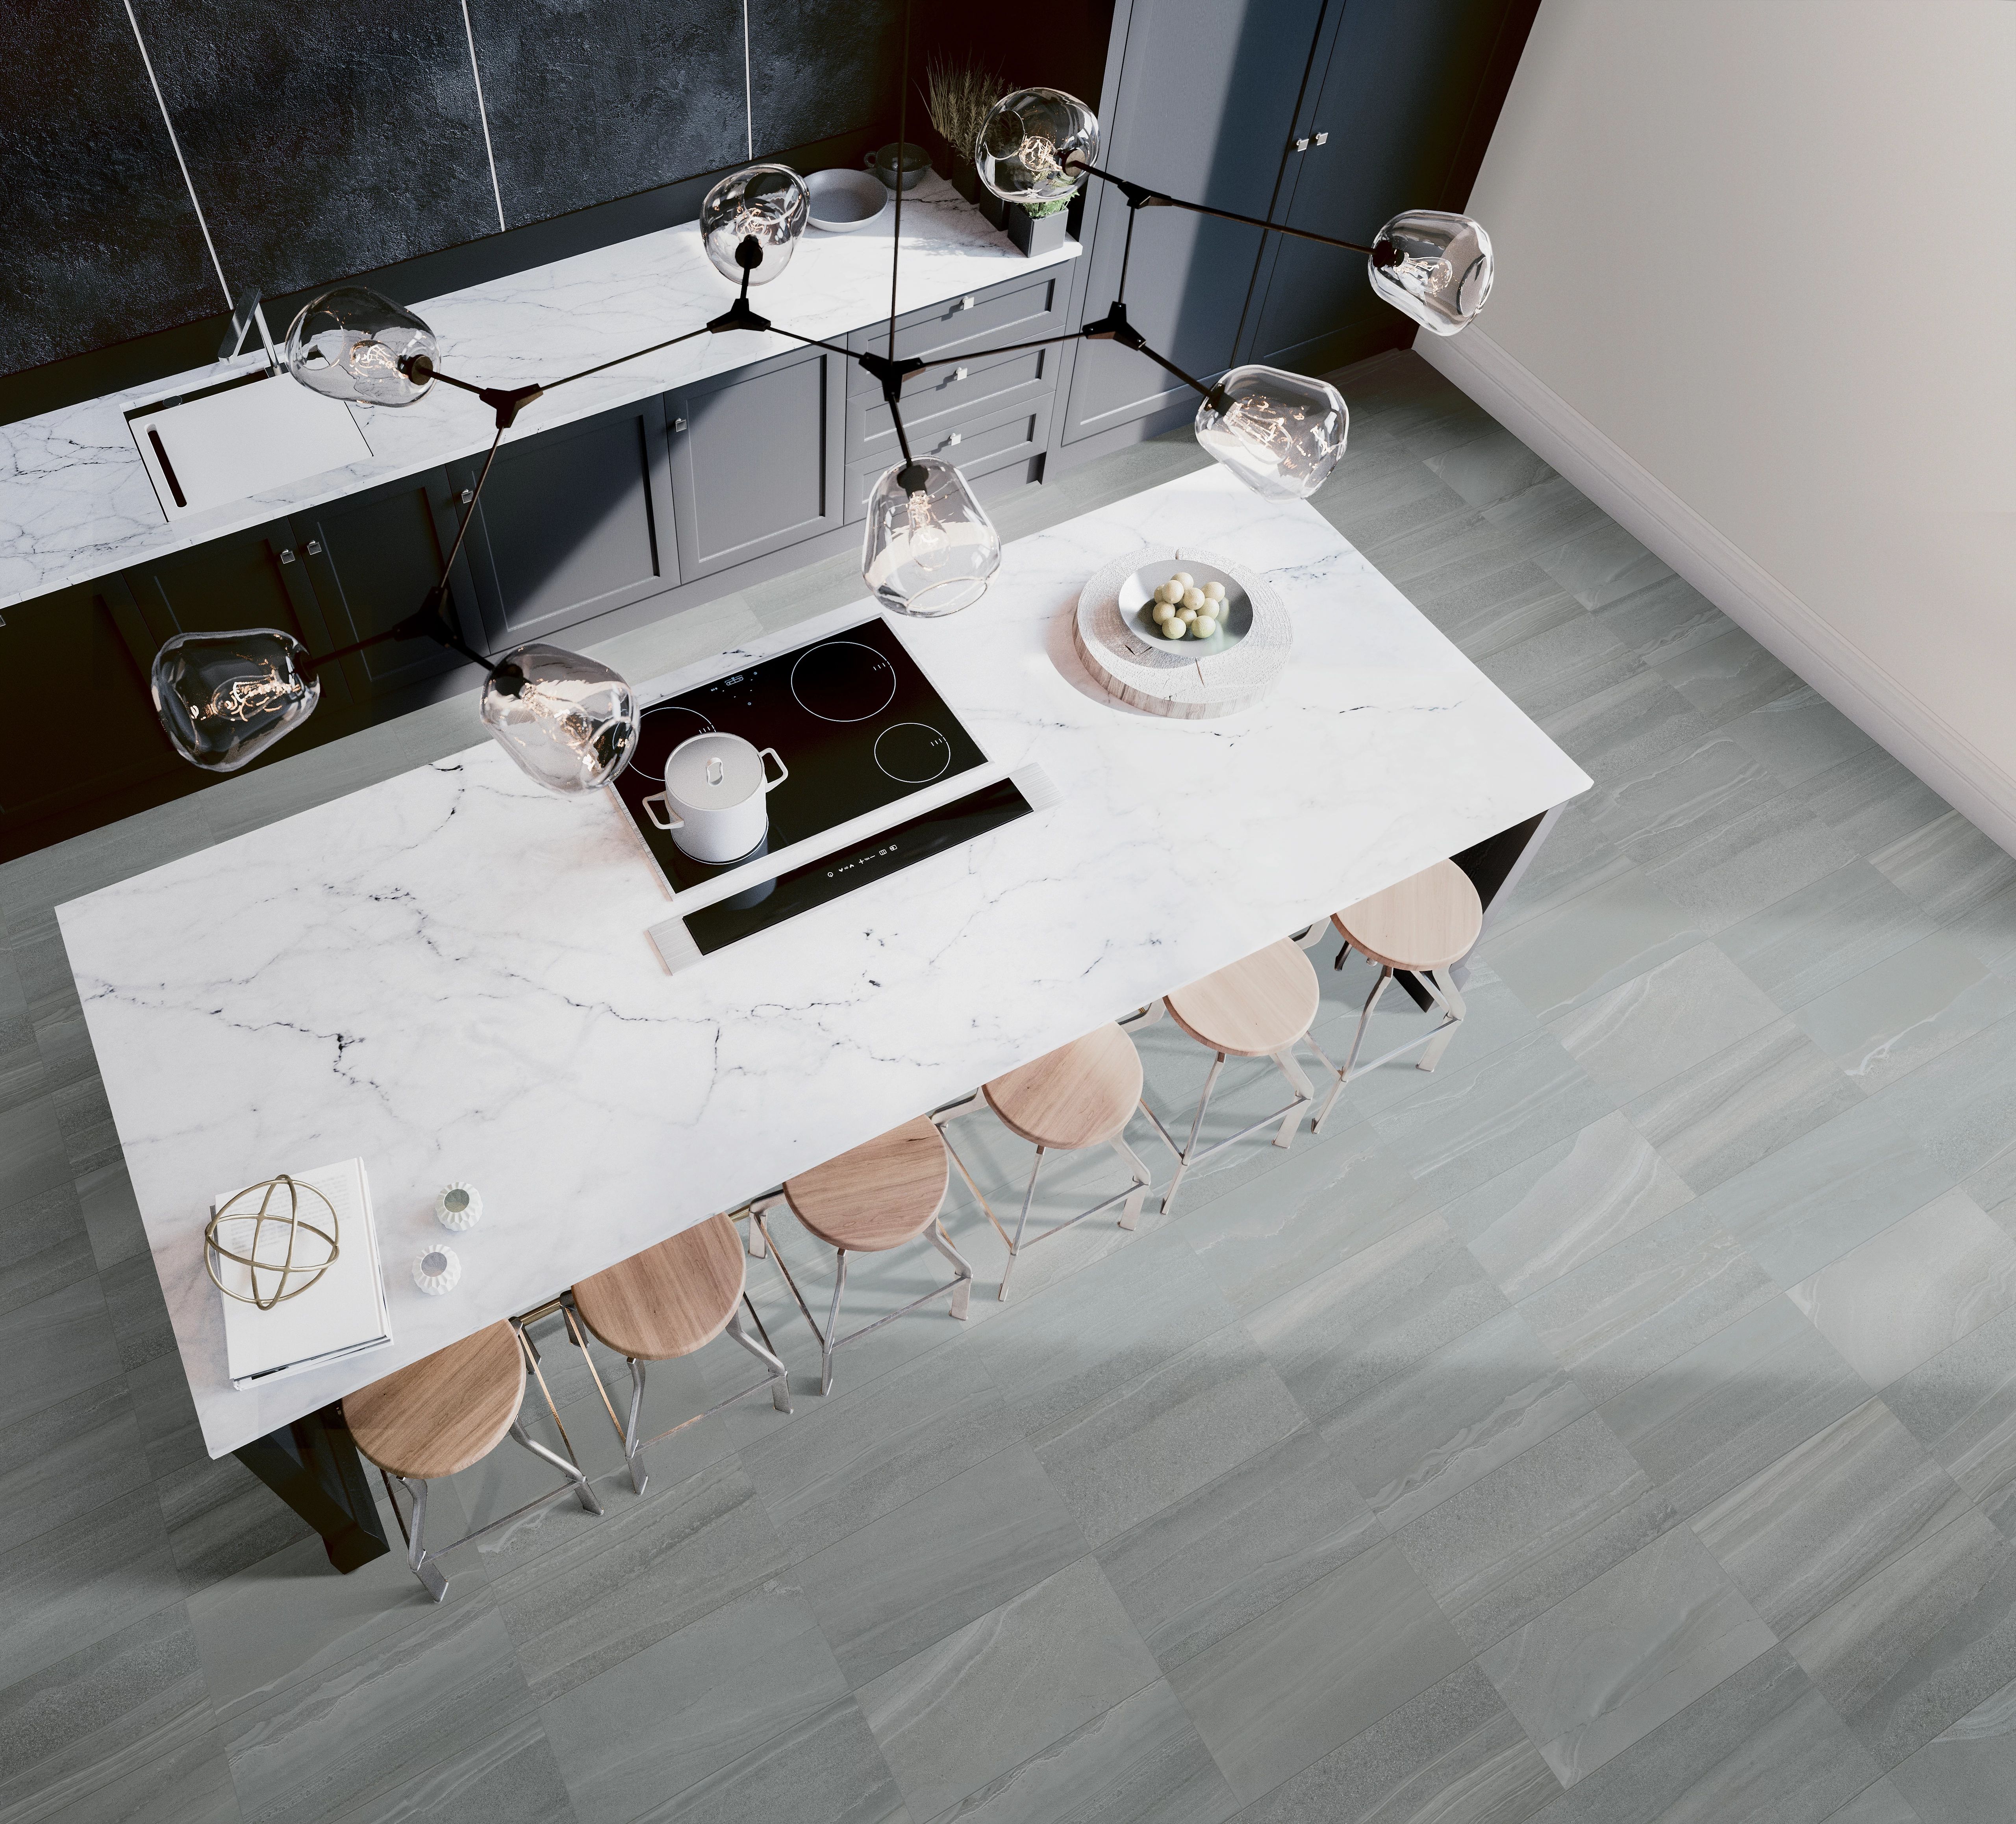 The Davenport Series is glazed porcelain that emulates a vein-cut sandstone. It provides a clean, modern look to any environment.